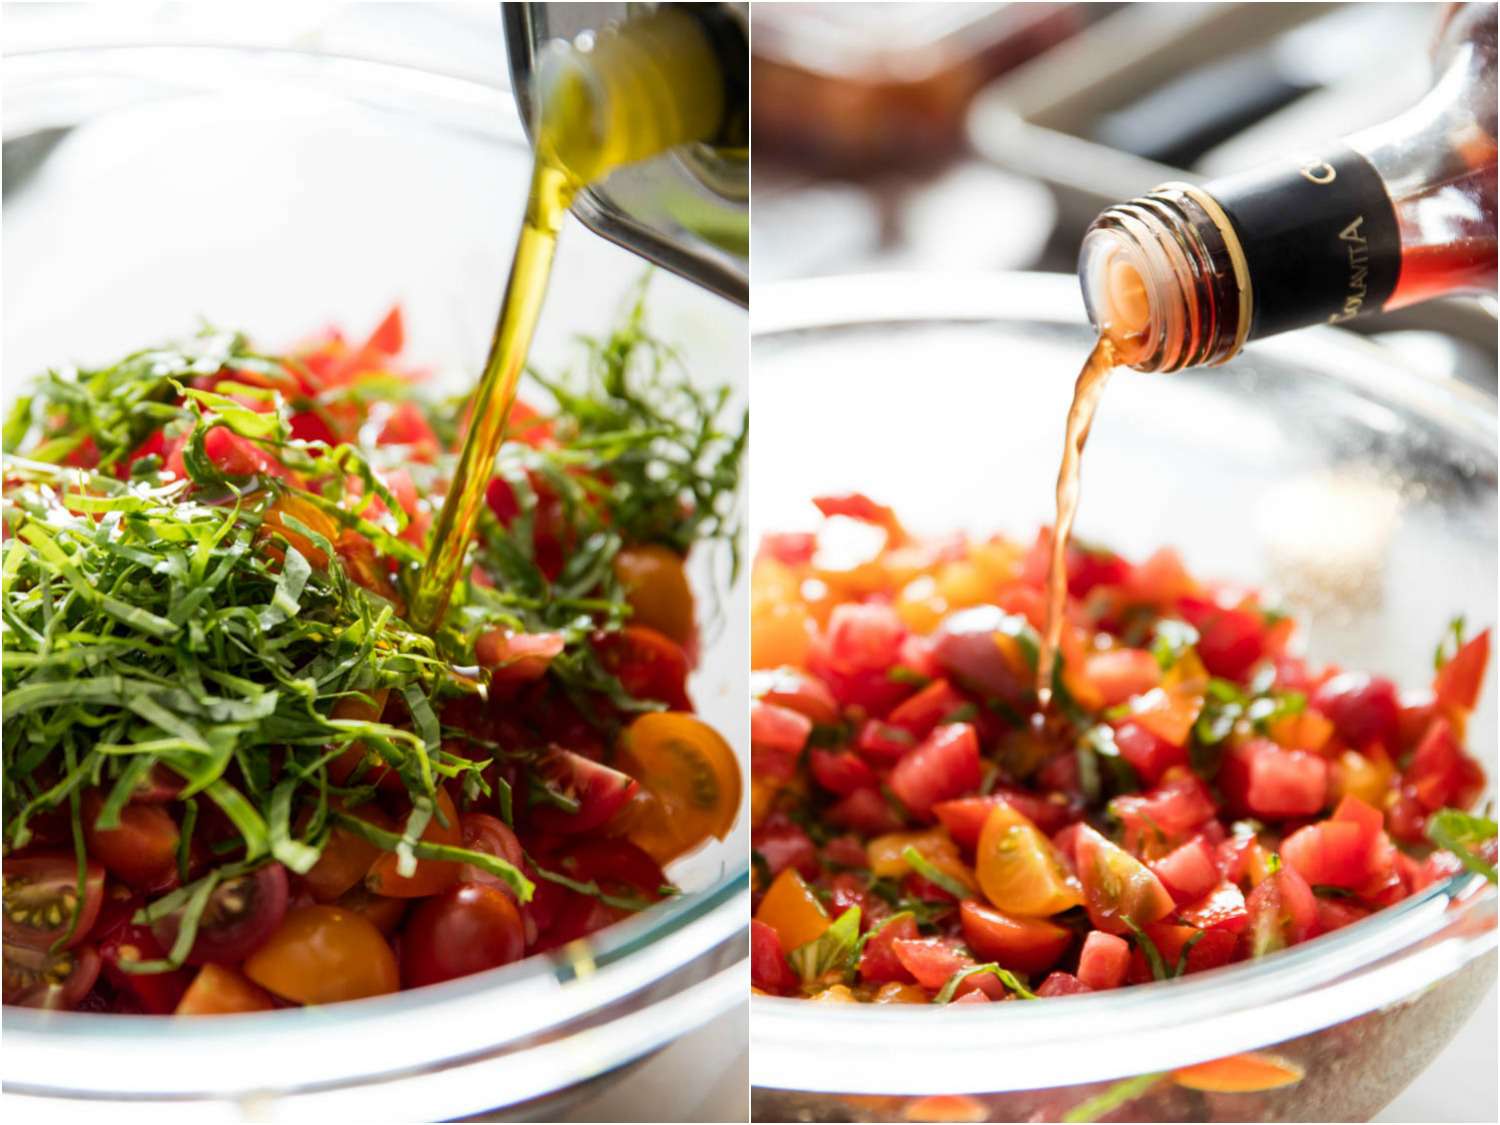 Collage showing a bowl of sliced tomatoes and shredded basil being dressed with olive oil and then vinegar.